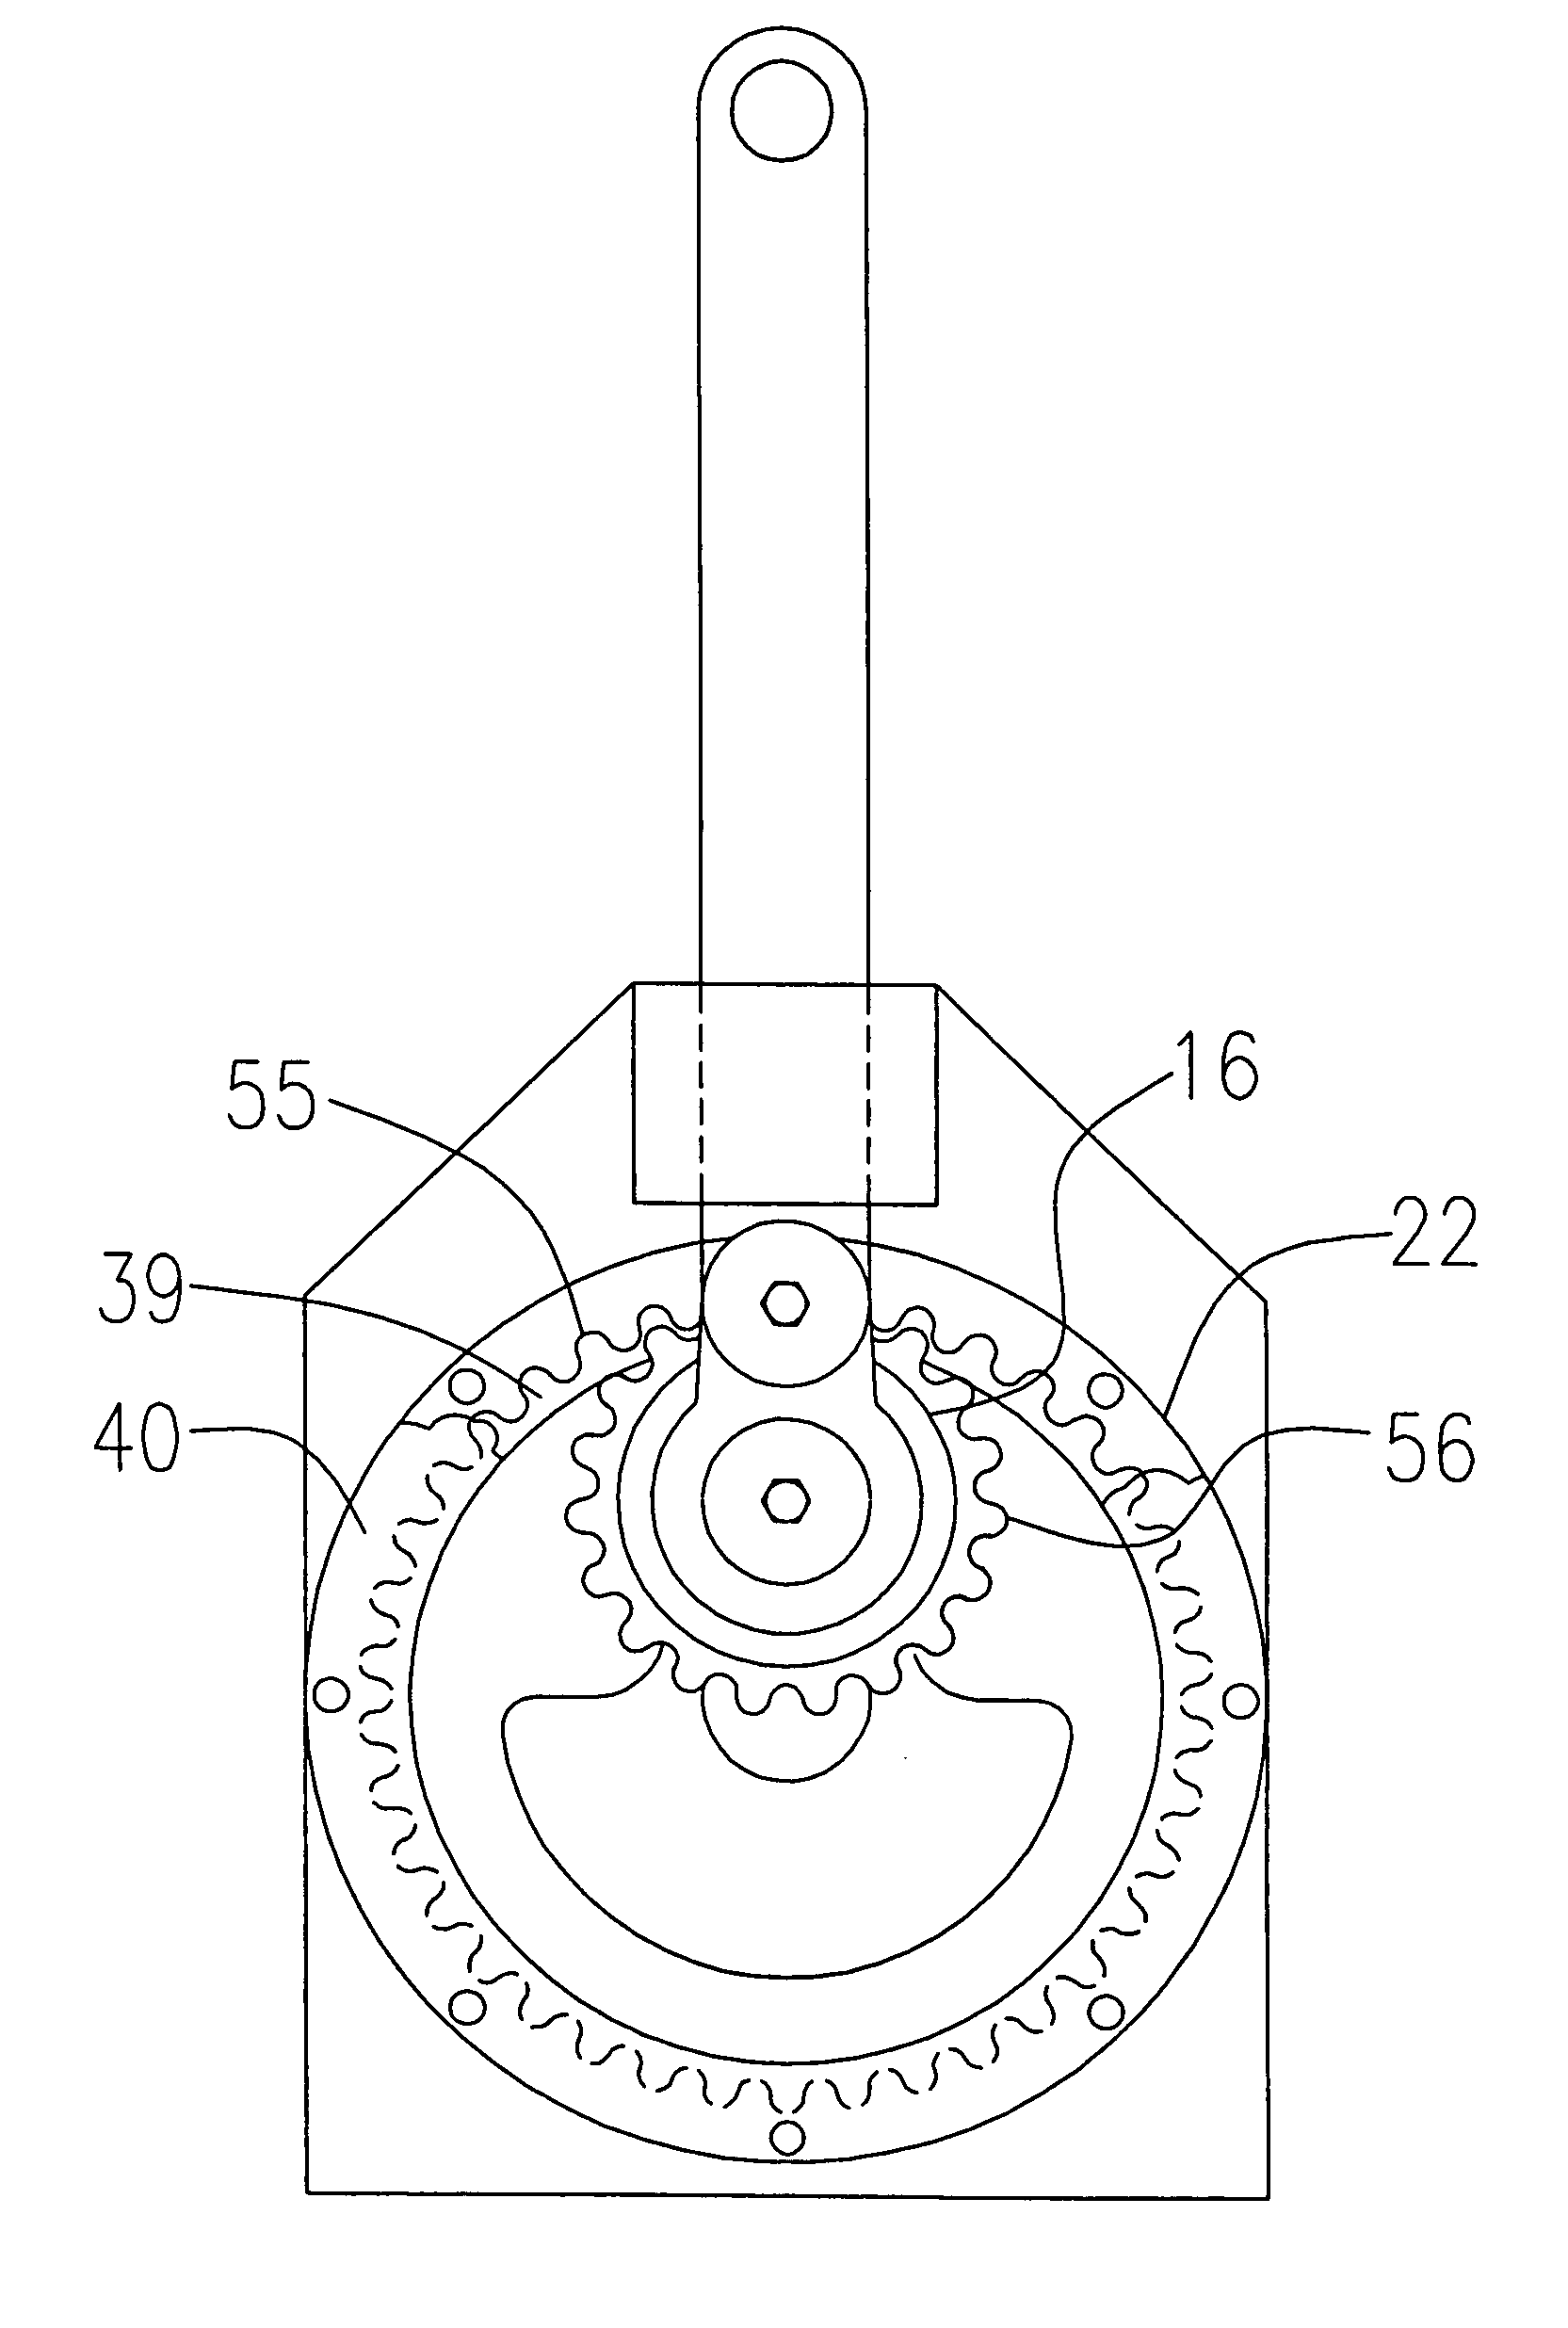 Hypocycloidal drive unit for conversion of rotary to linear motion particularly for use in fiberglass insulation production machinery